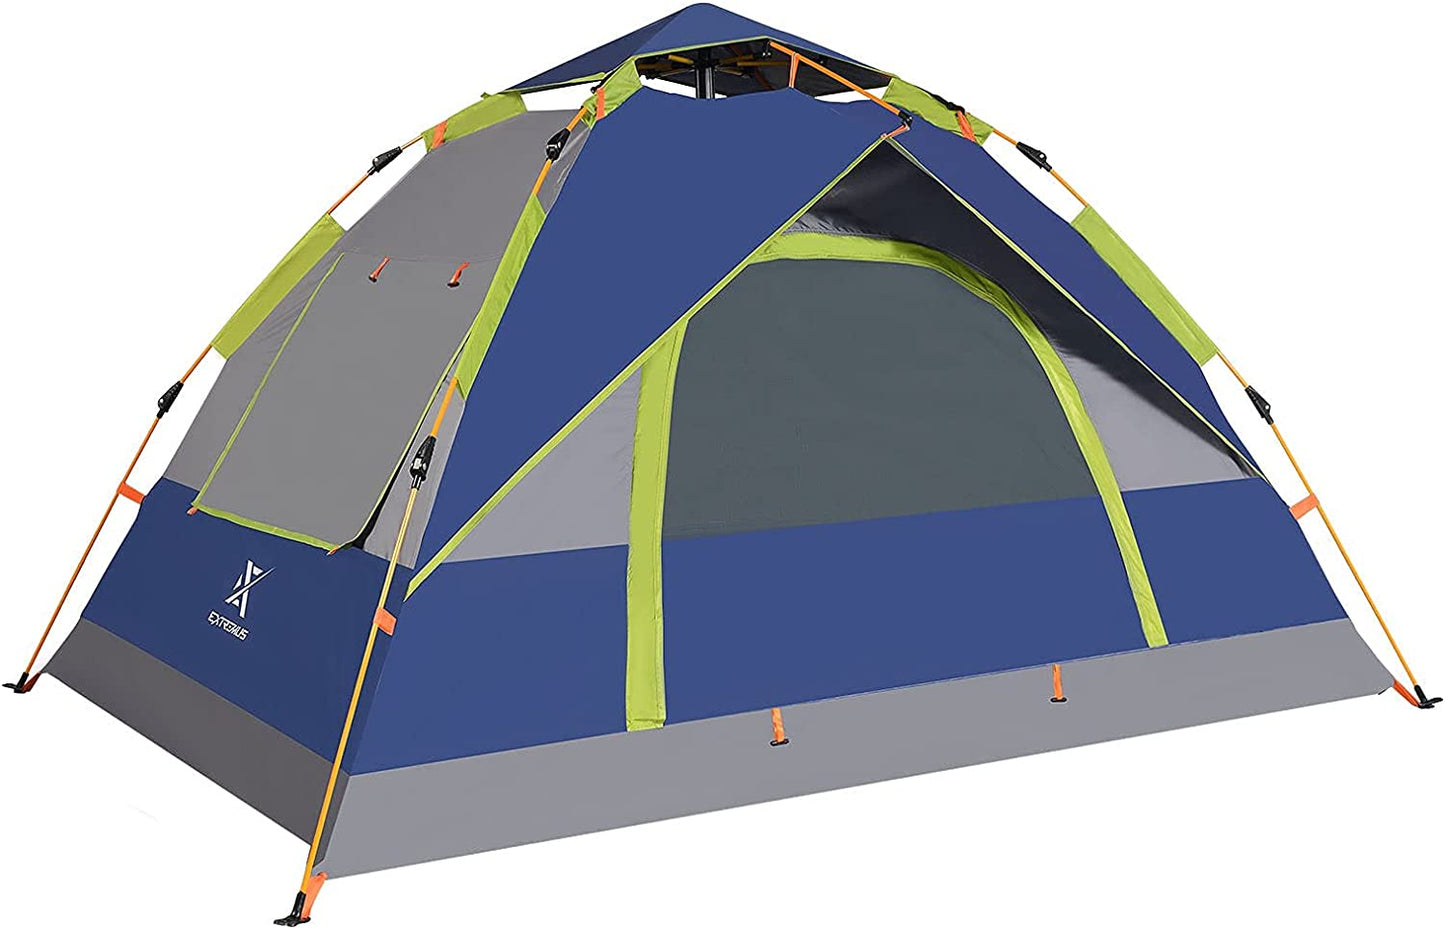 Instant Pop-Up Camping Tent, 2/4/6 Person Tent, Family Tents for Camping, Water Resistance, Lightweight,Durable 190T Polyester Fabric, Durable Fiberglass Poles, Includes Tent Stakes